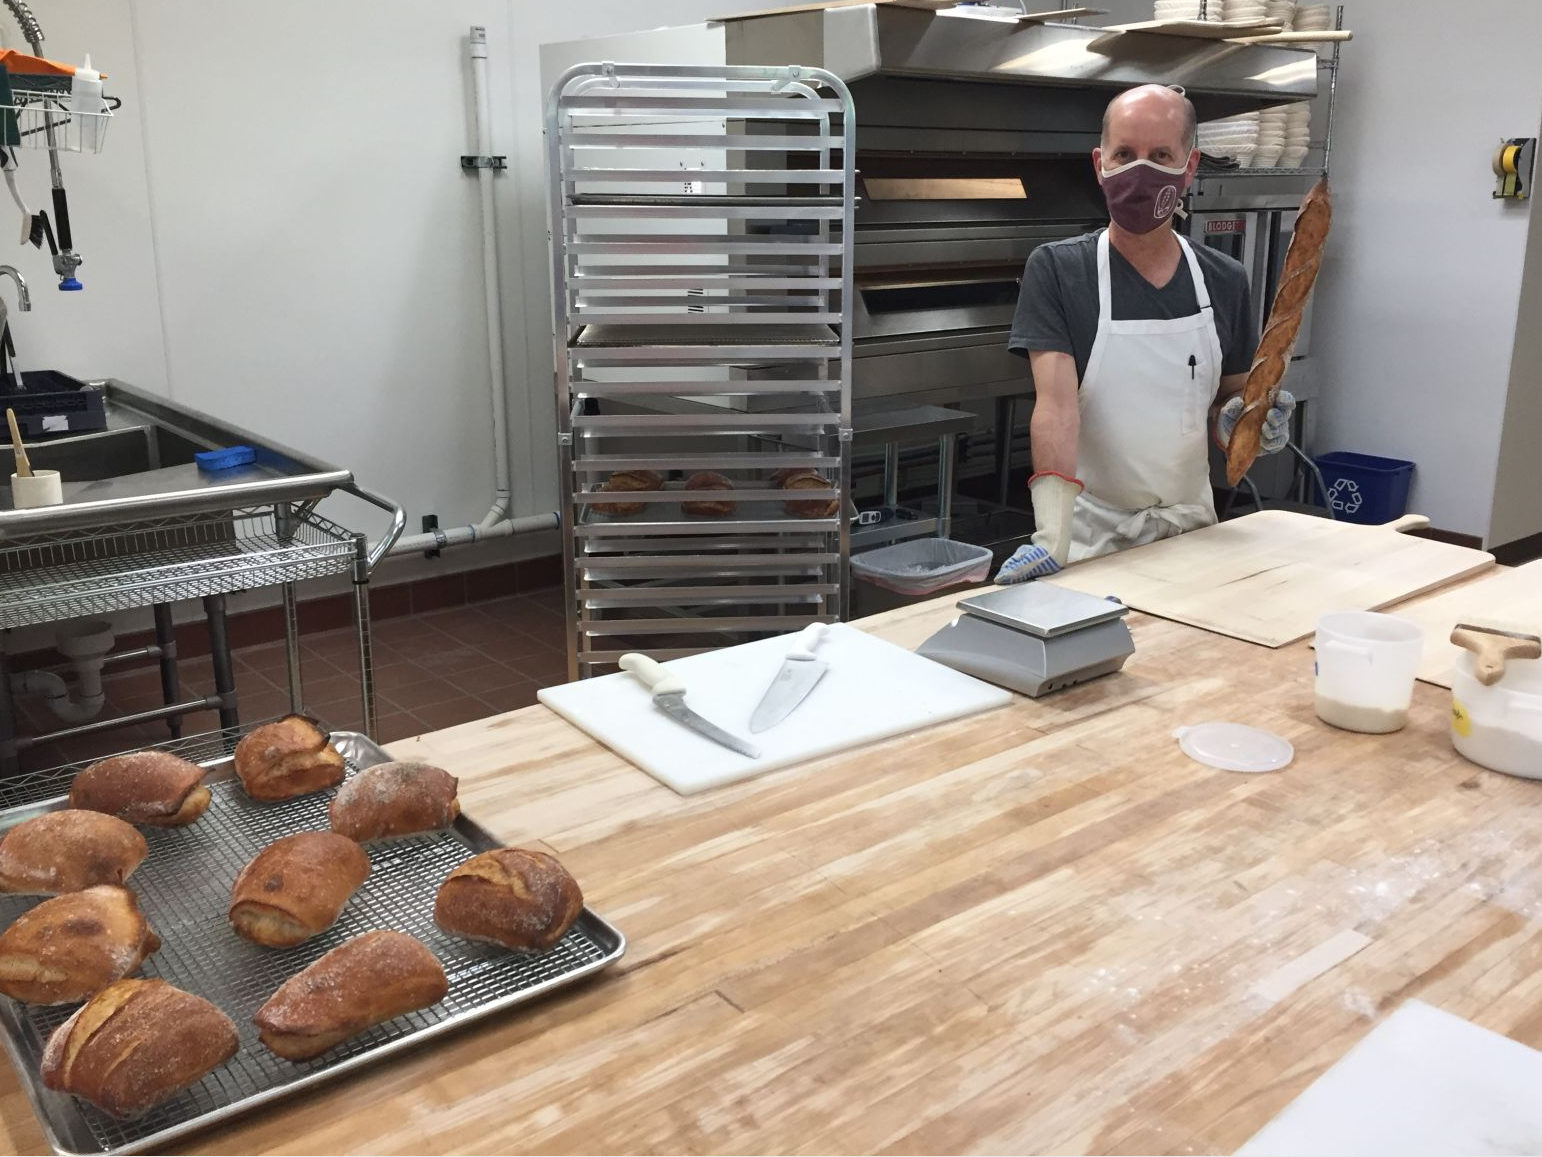 Matt Sanger, with Round River Baking, makes test batches of scones and baguettes at his new location at 250 N. Main St. in Pocatello.